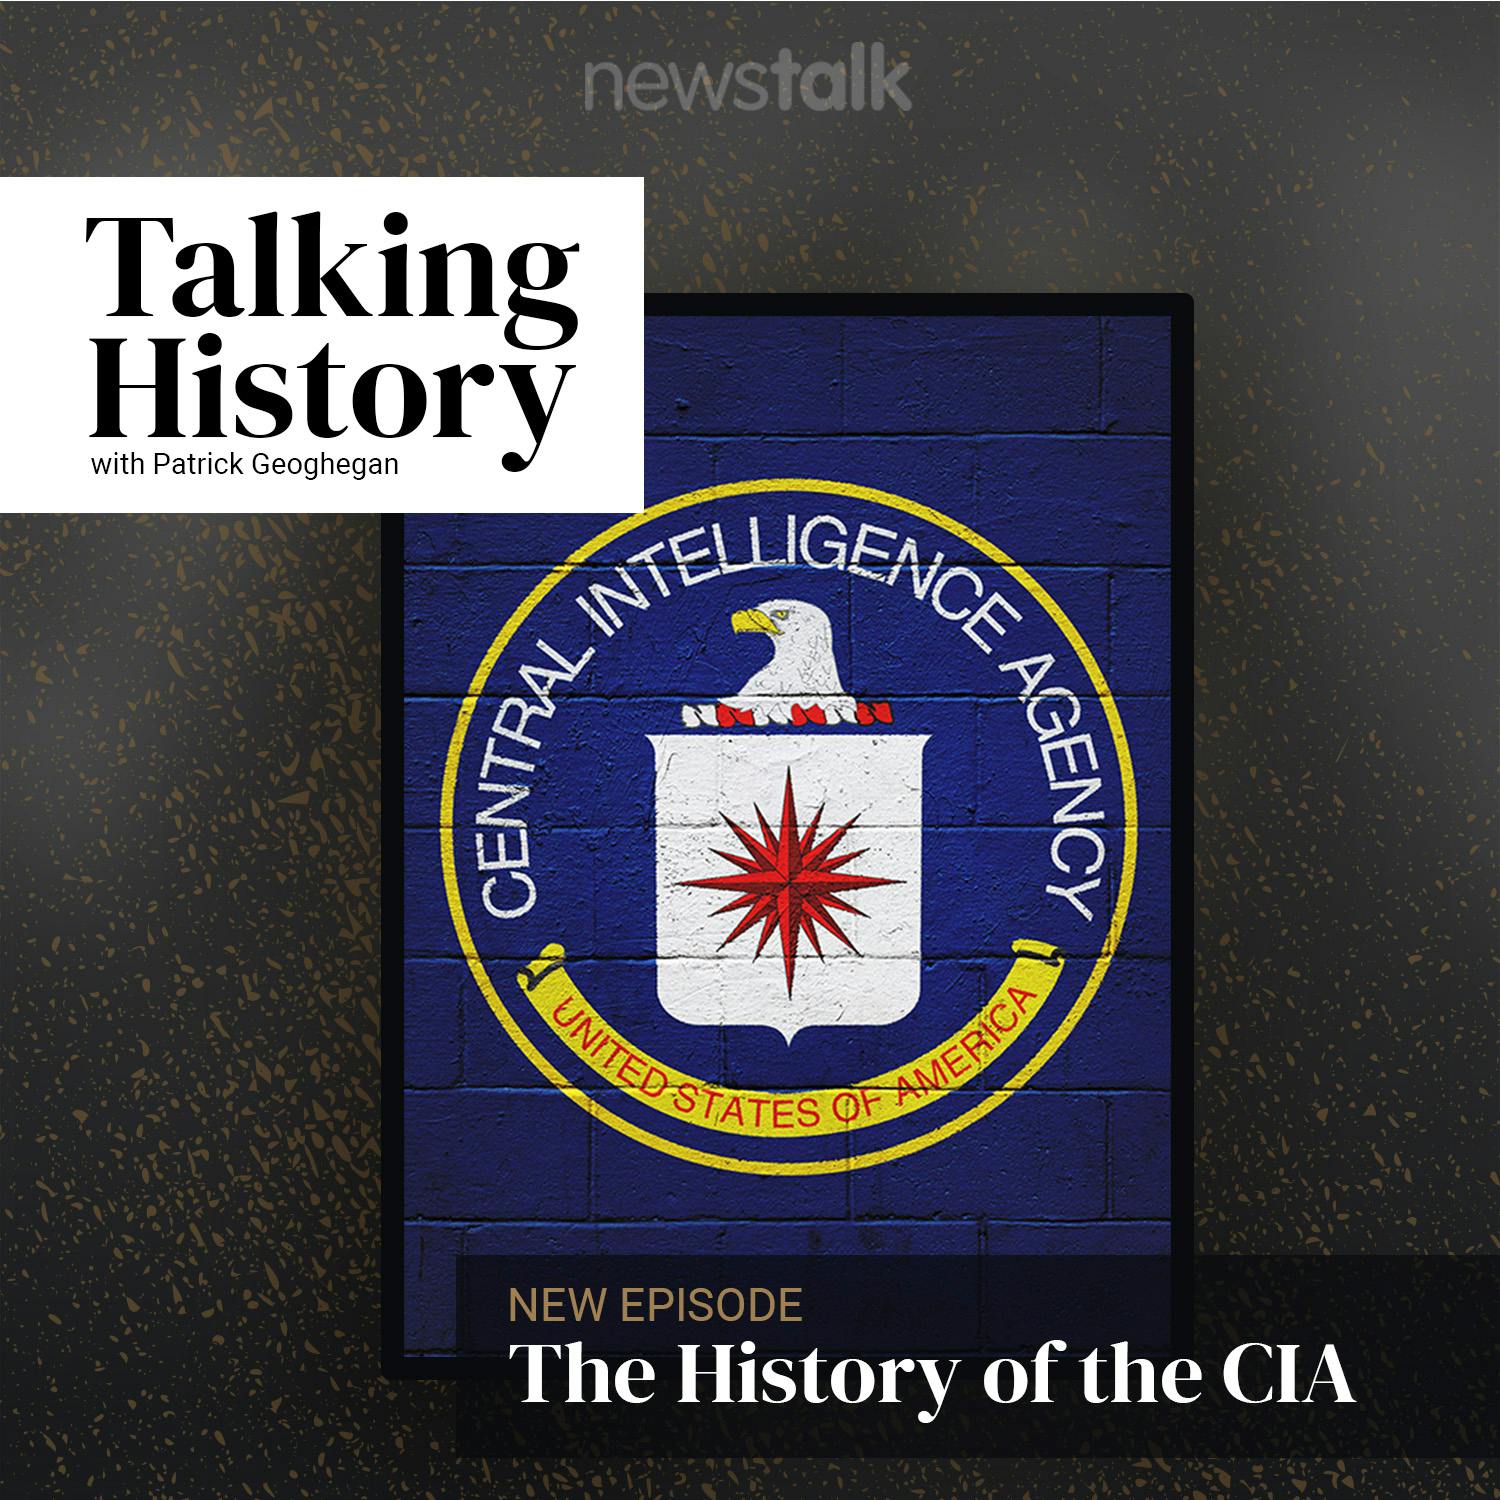 The History of the CIA